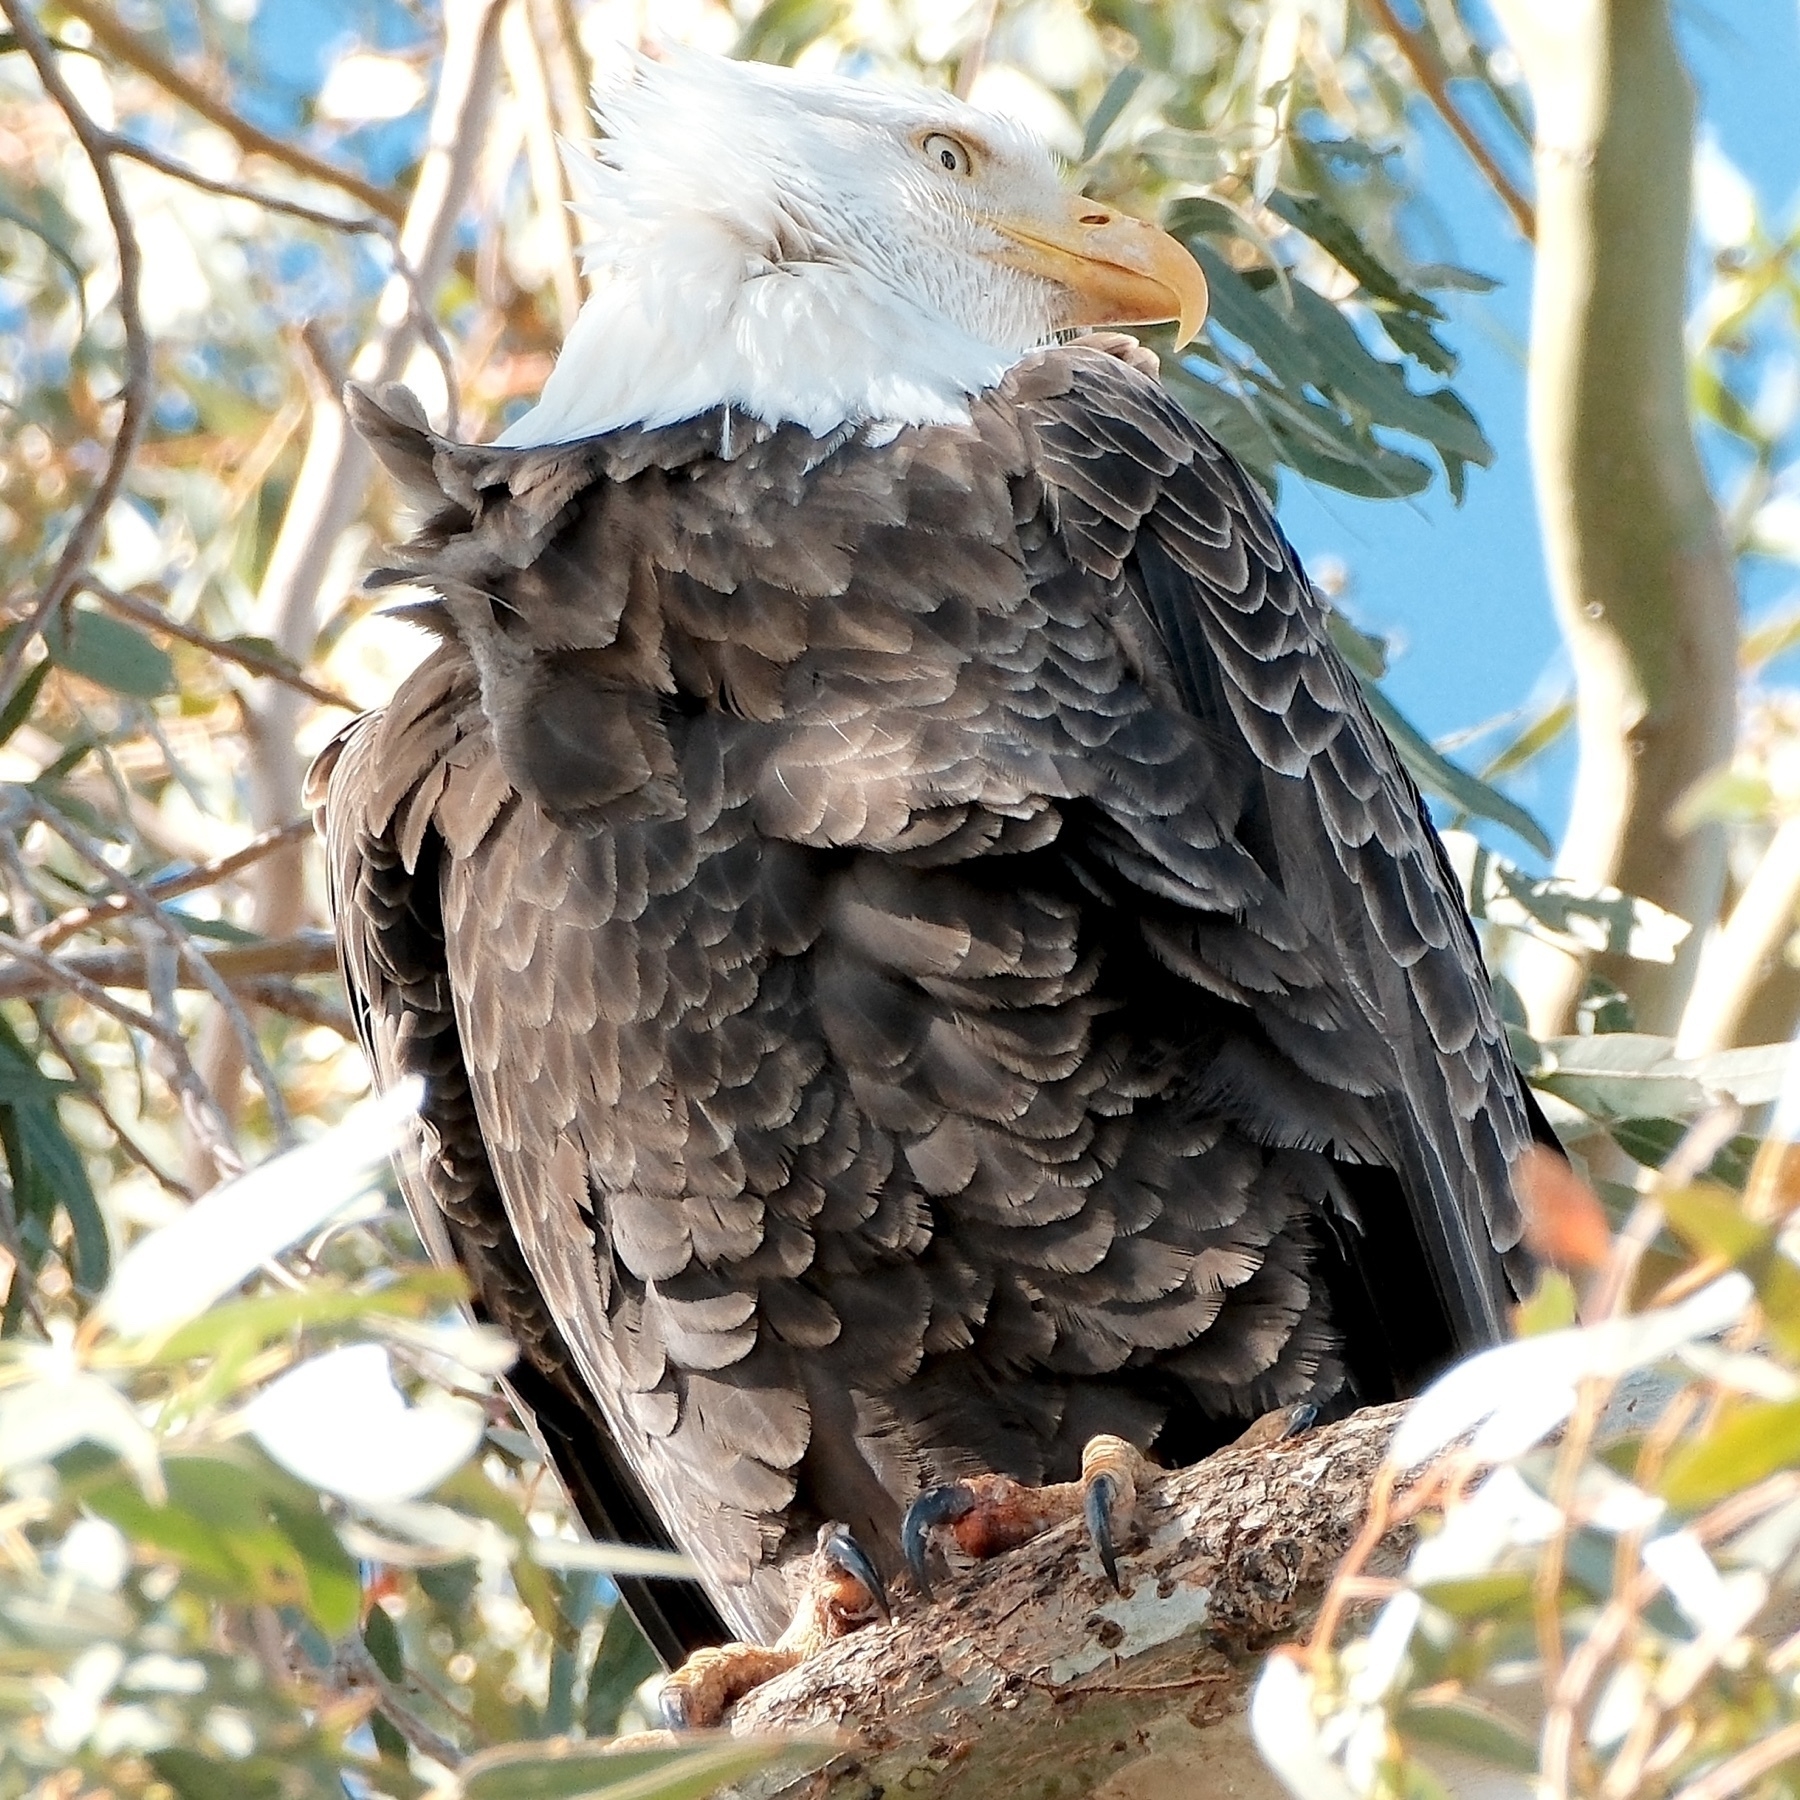 adult white & brown bald eagle looking back with its golden eyes while in a eucalyptus tree. Its full body is visible along with its talons.